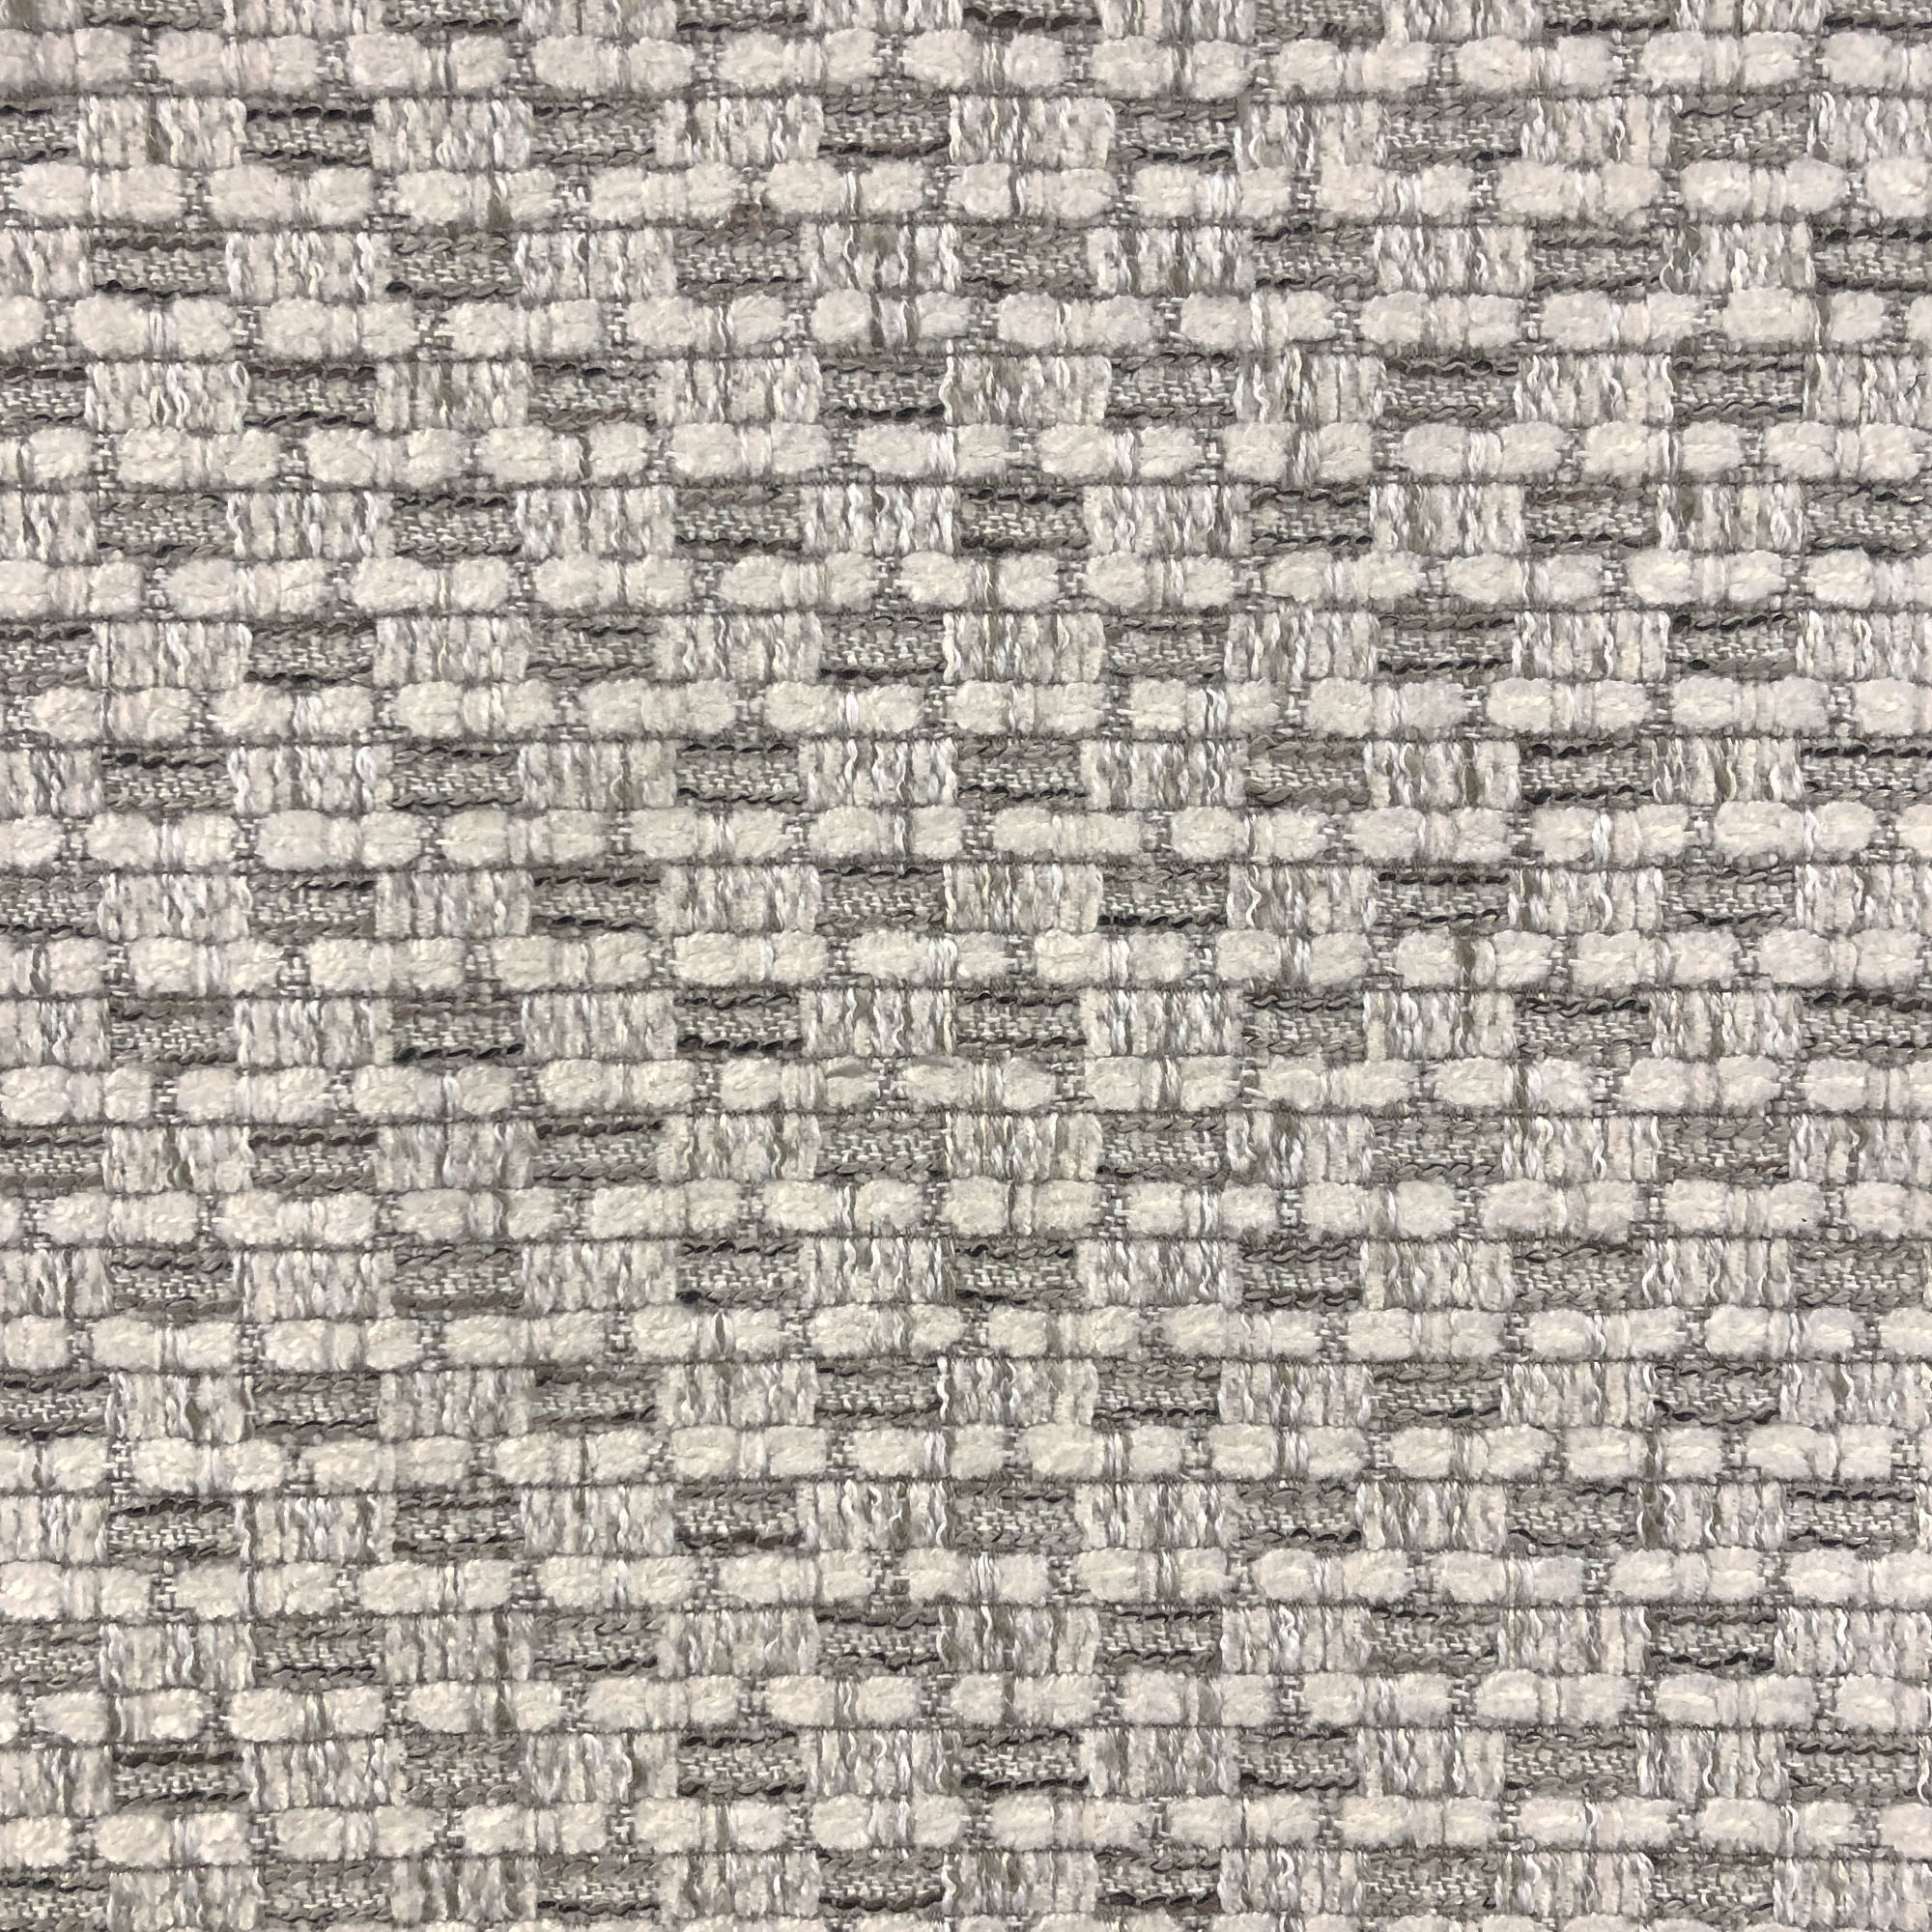 Seville Fabric | Textured Chenille - Rodeo Home